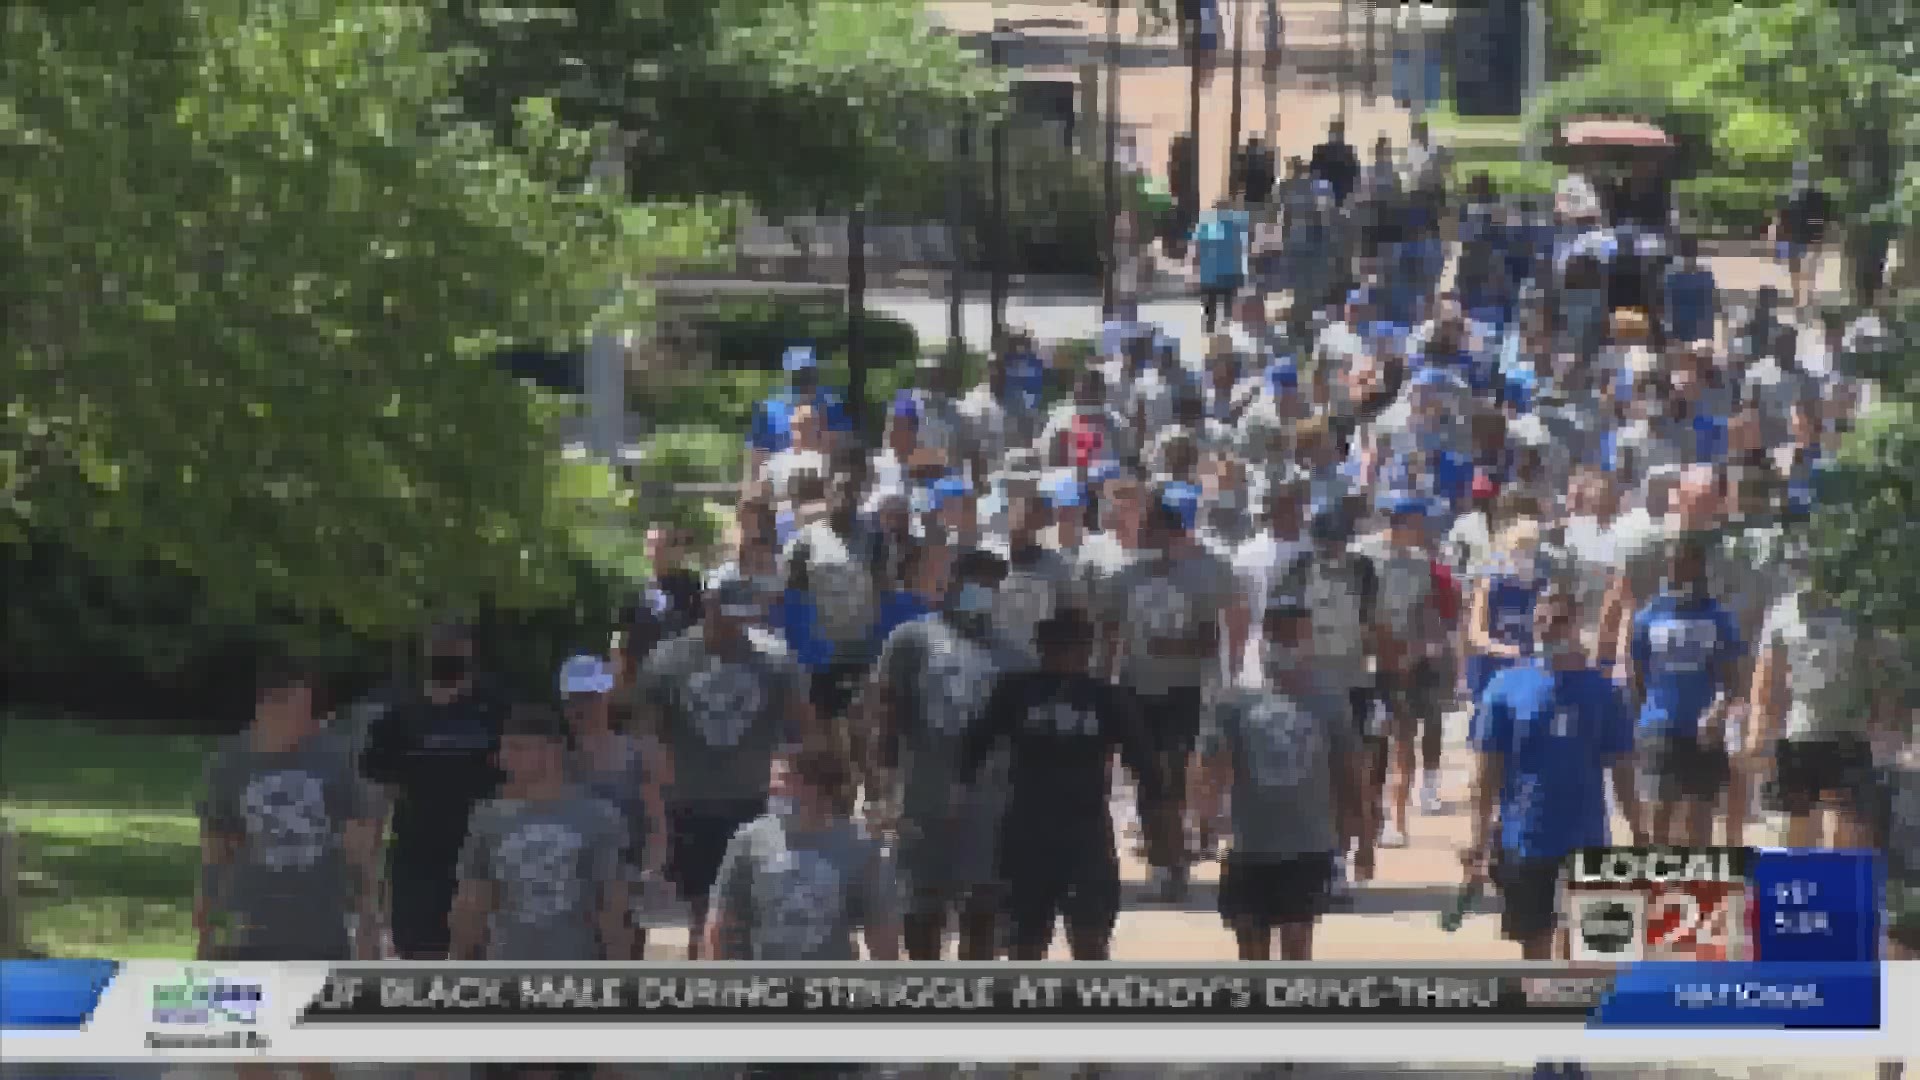 Univeristy of Memphis football team and others join in peaceful protest in support of Black Lives Matter